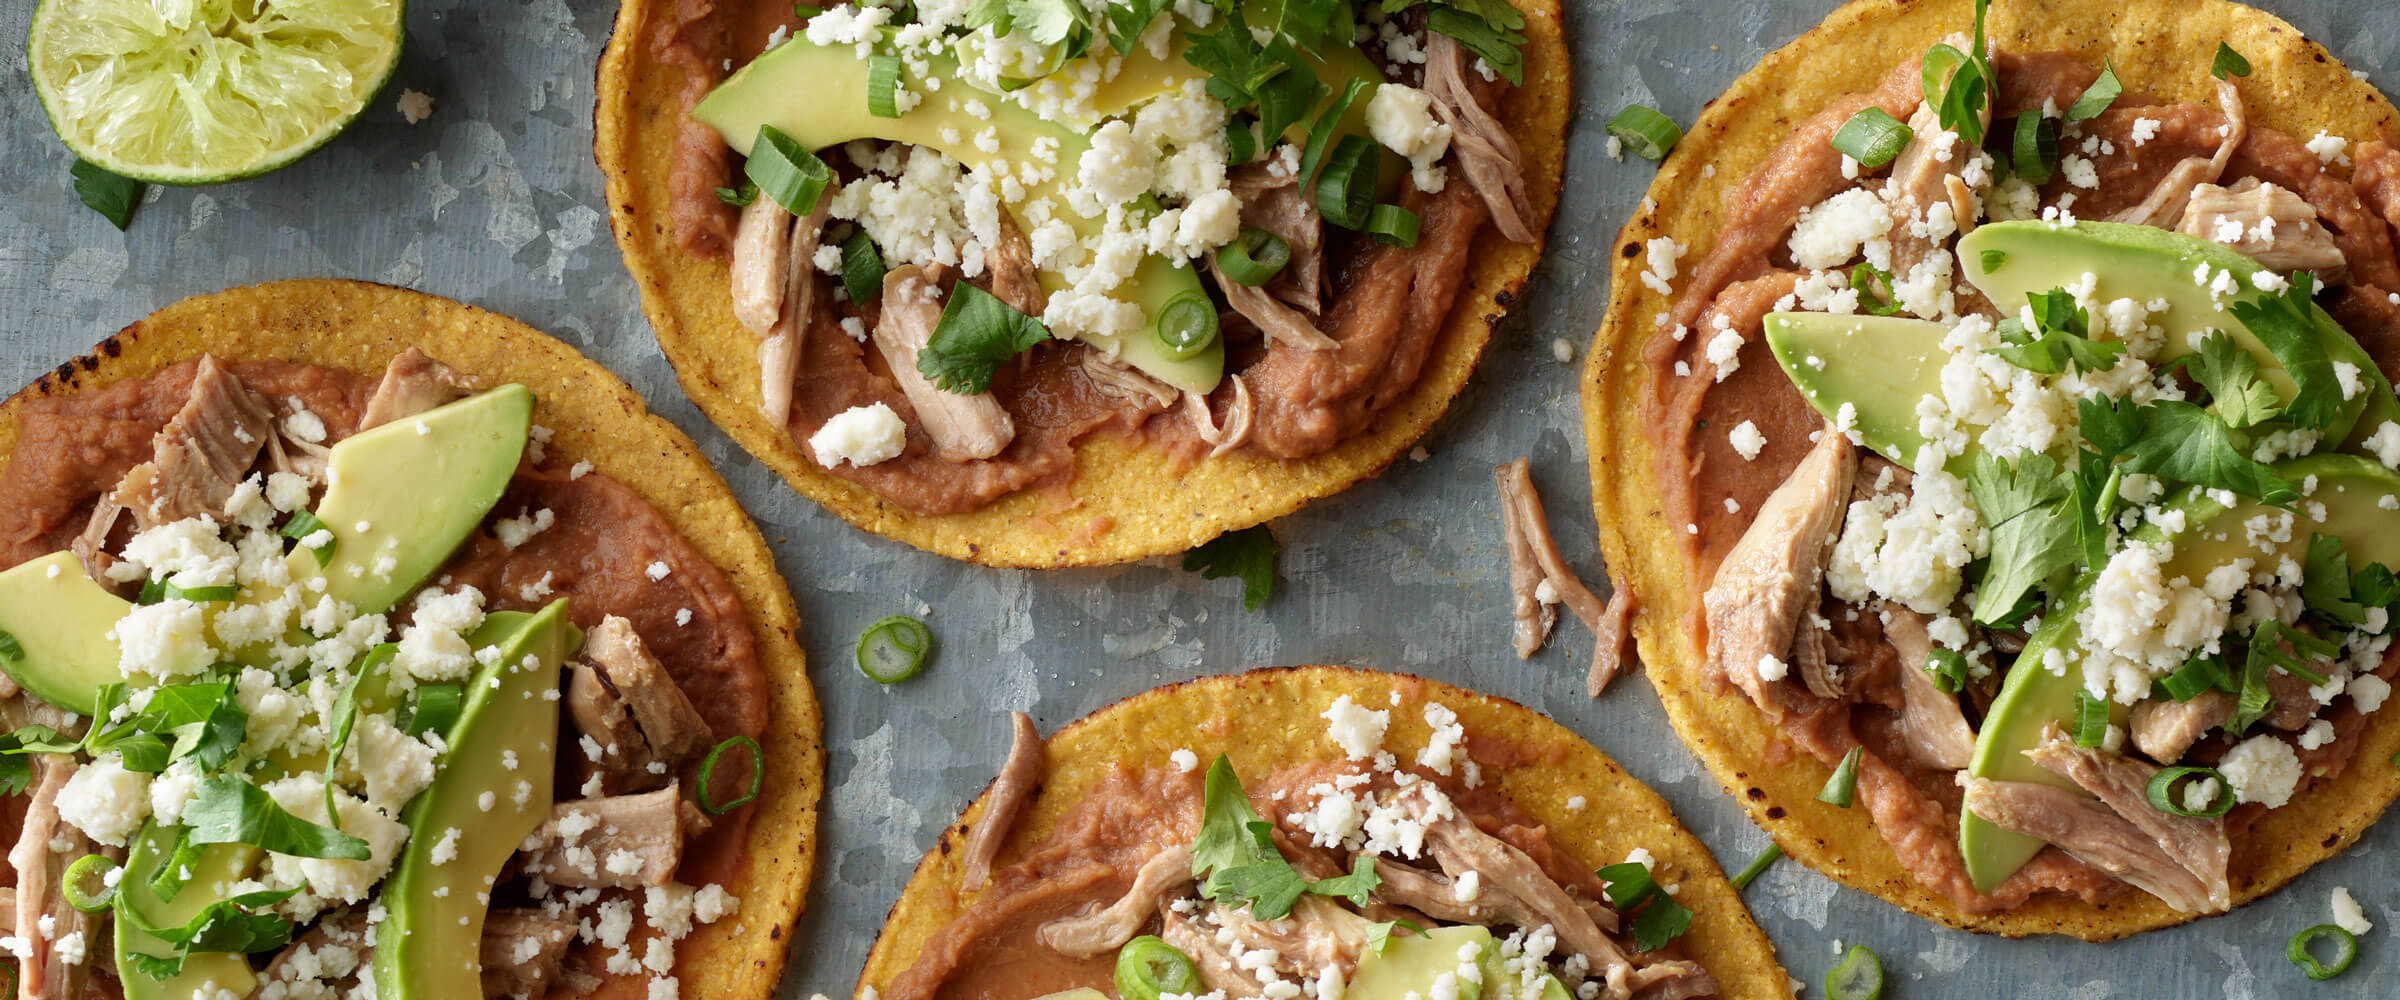 Pork Roast Tostadas topped with cheese, greens and avocado on gray platter